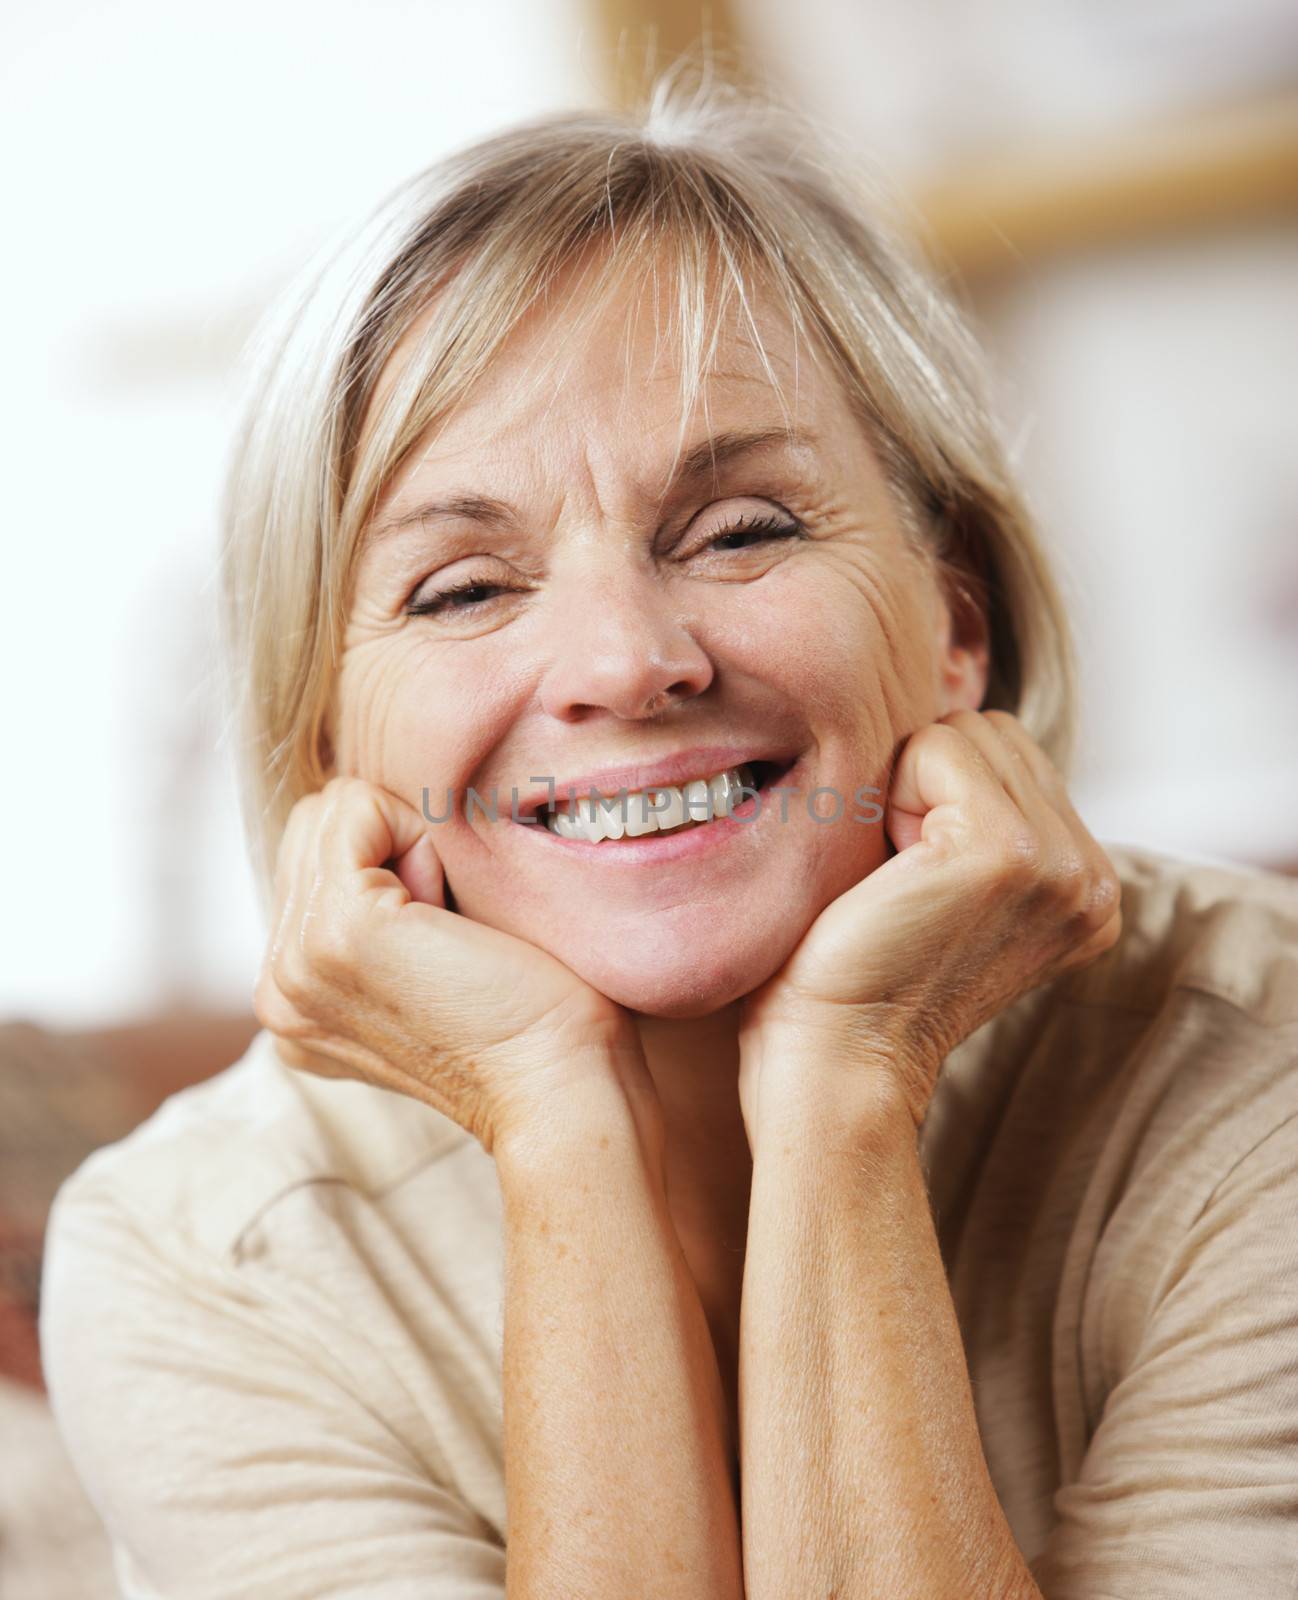 Portrait of a smiling senior woman sitting on couch